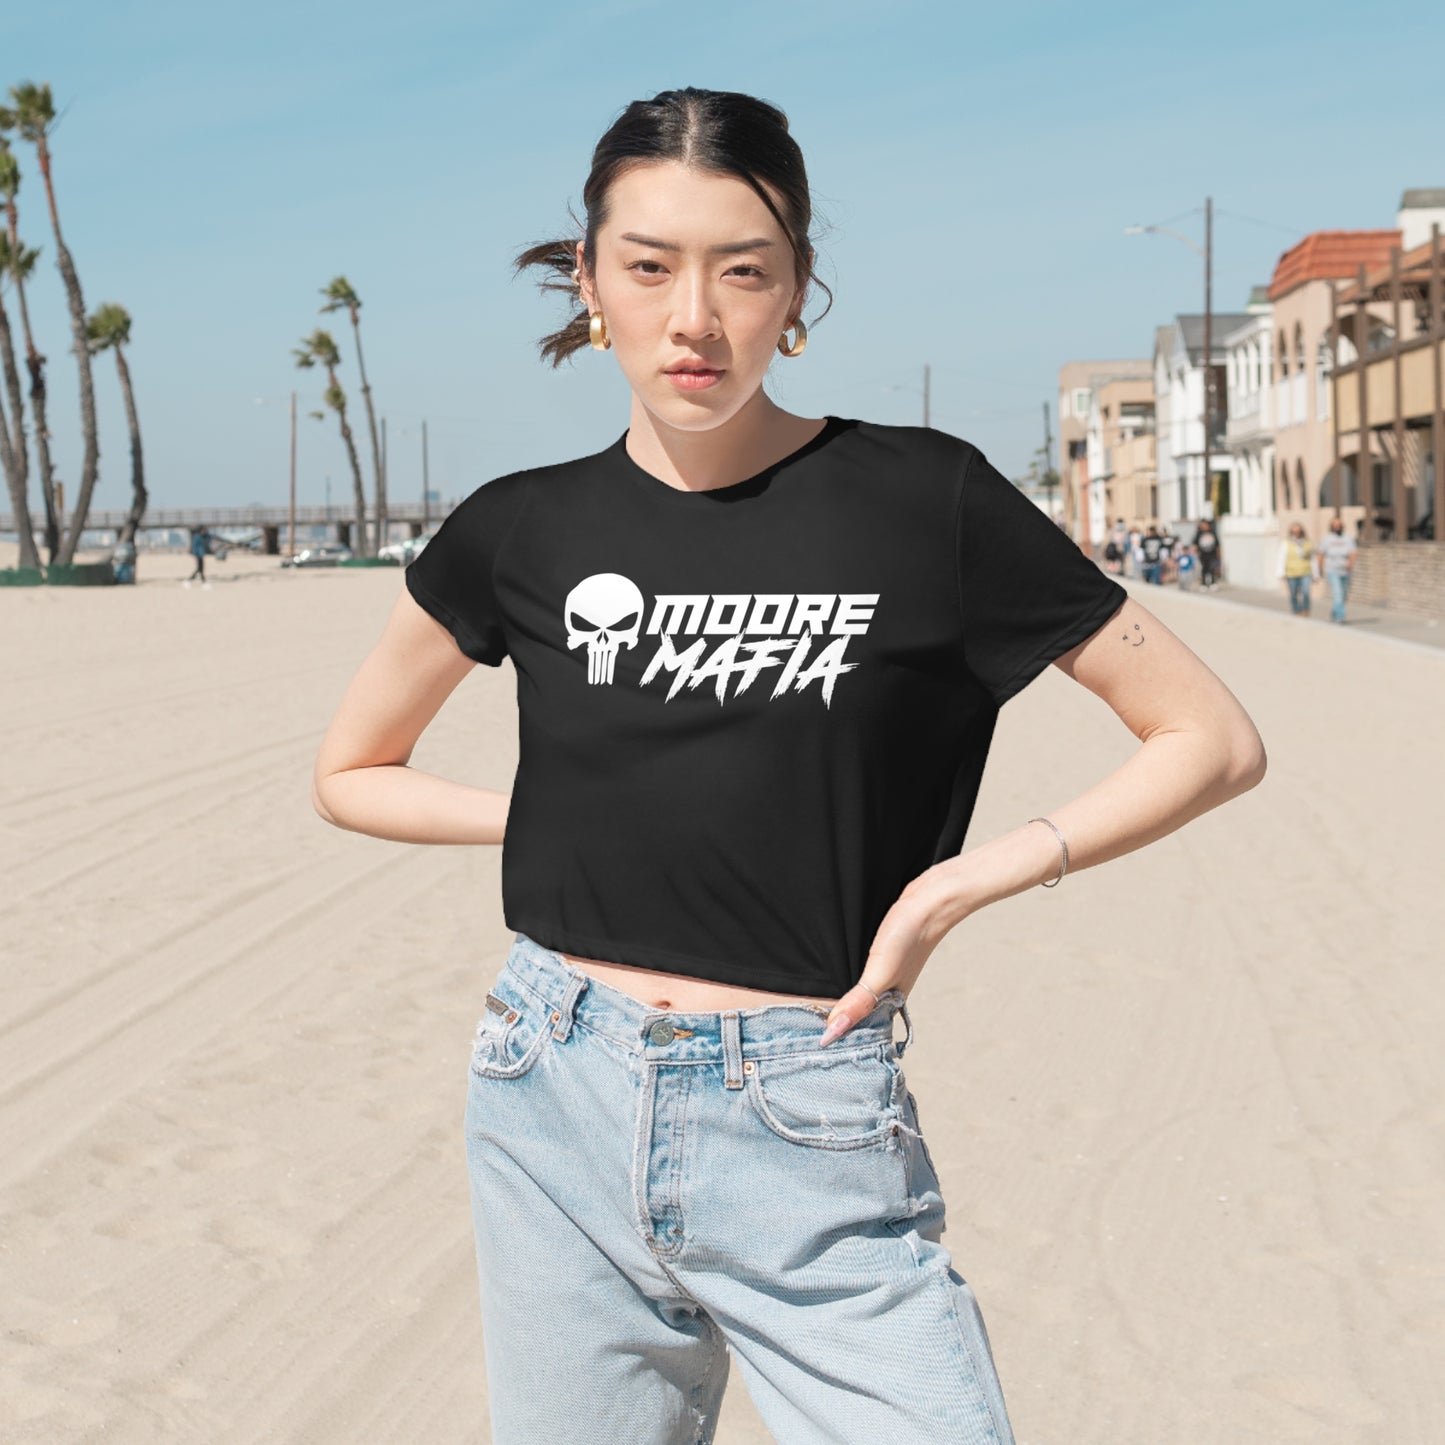 Bad Bitches Ride Women's Flowy Cropped Tee